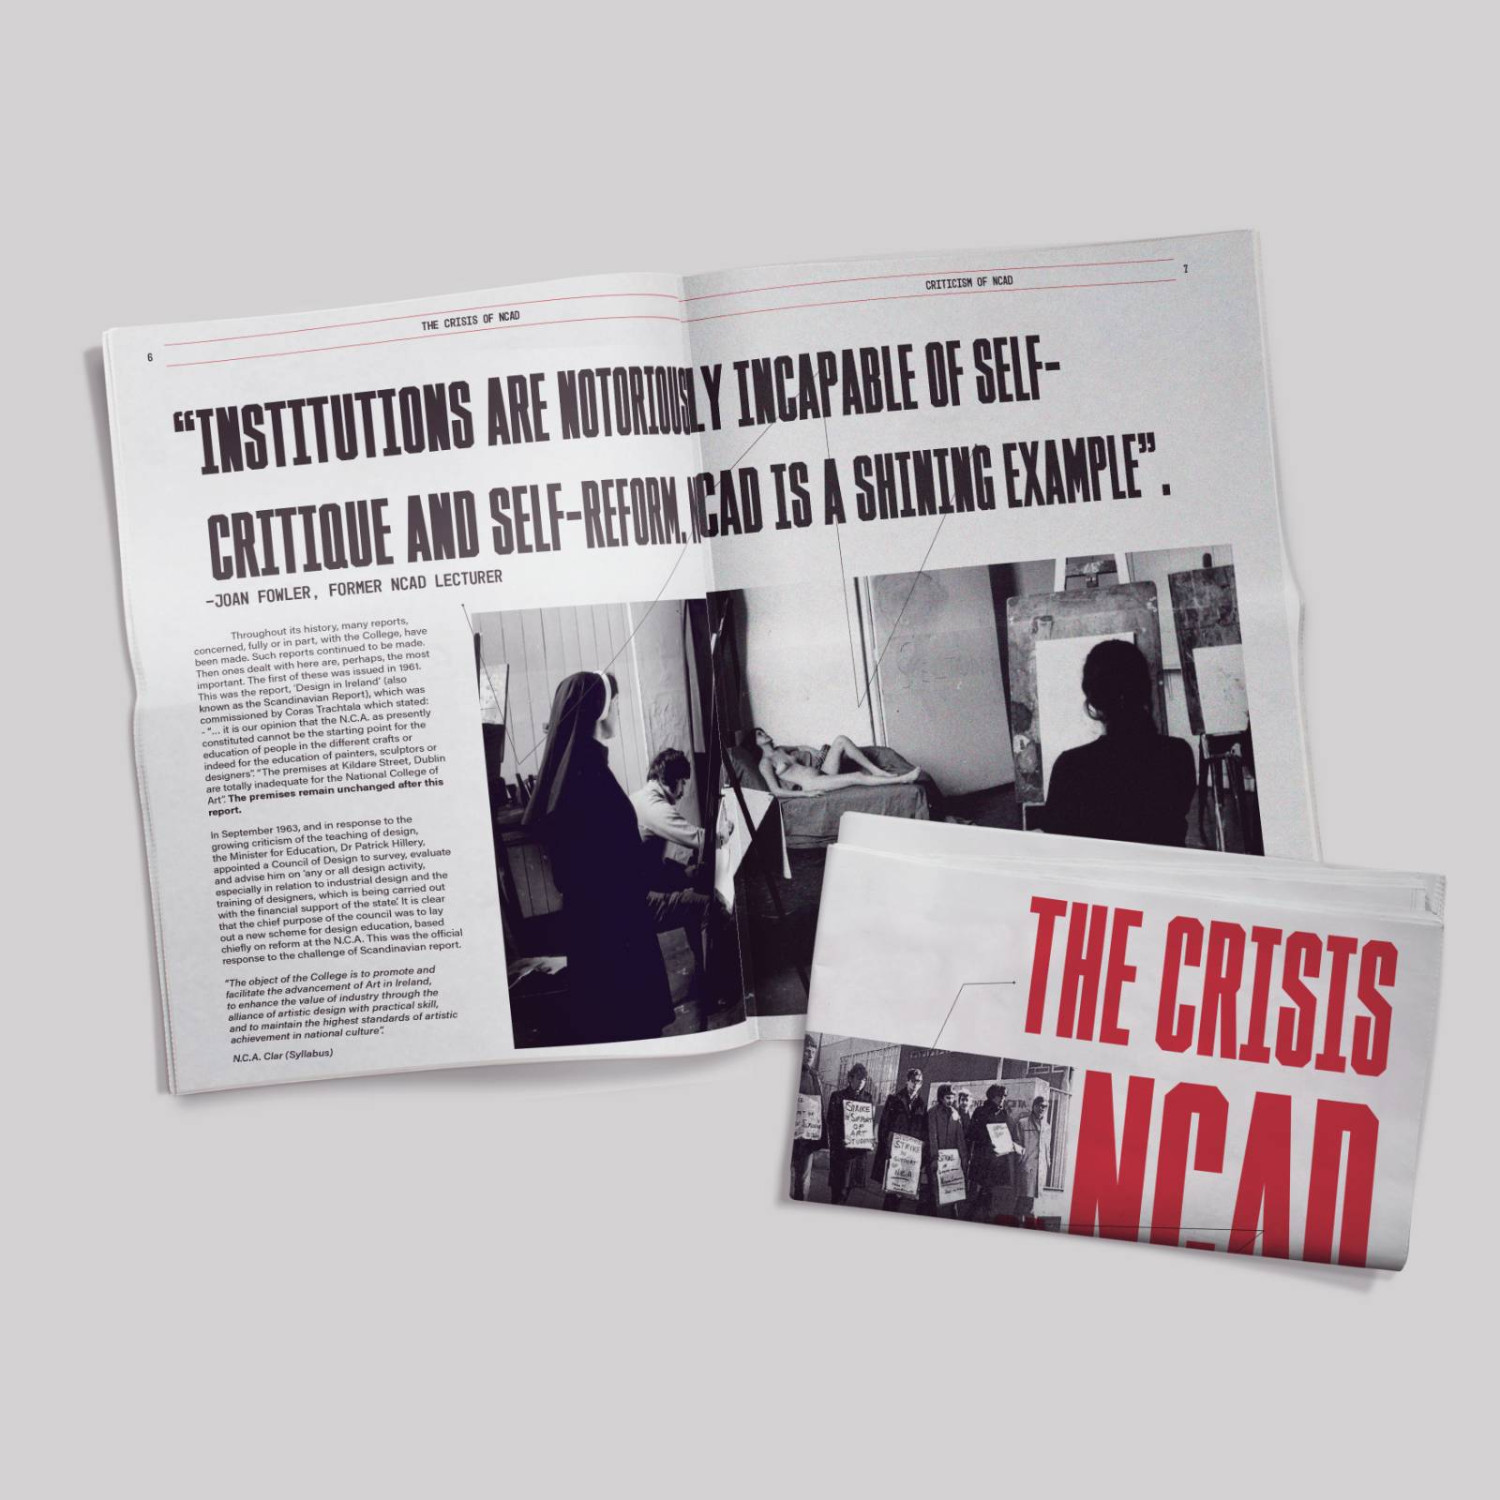 *The crisis of NCAD 1969-71*, publication, page spread